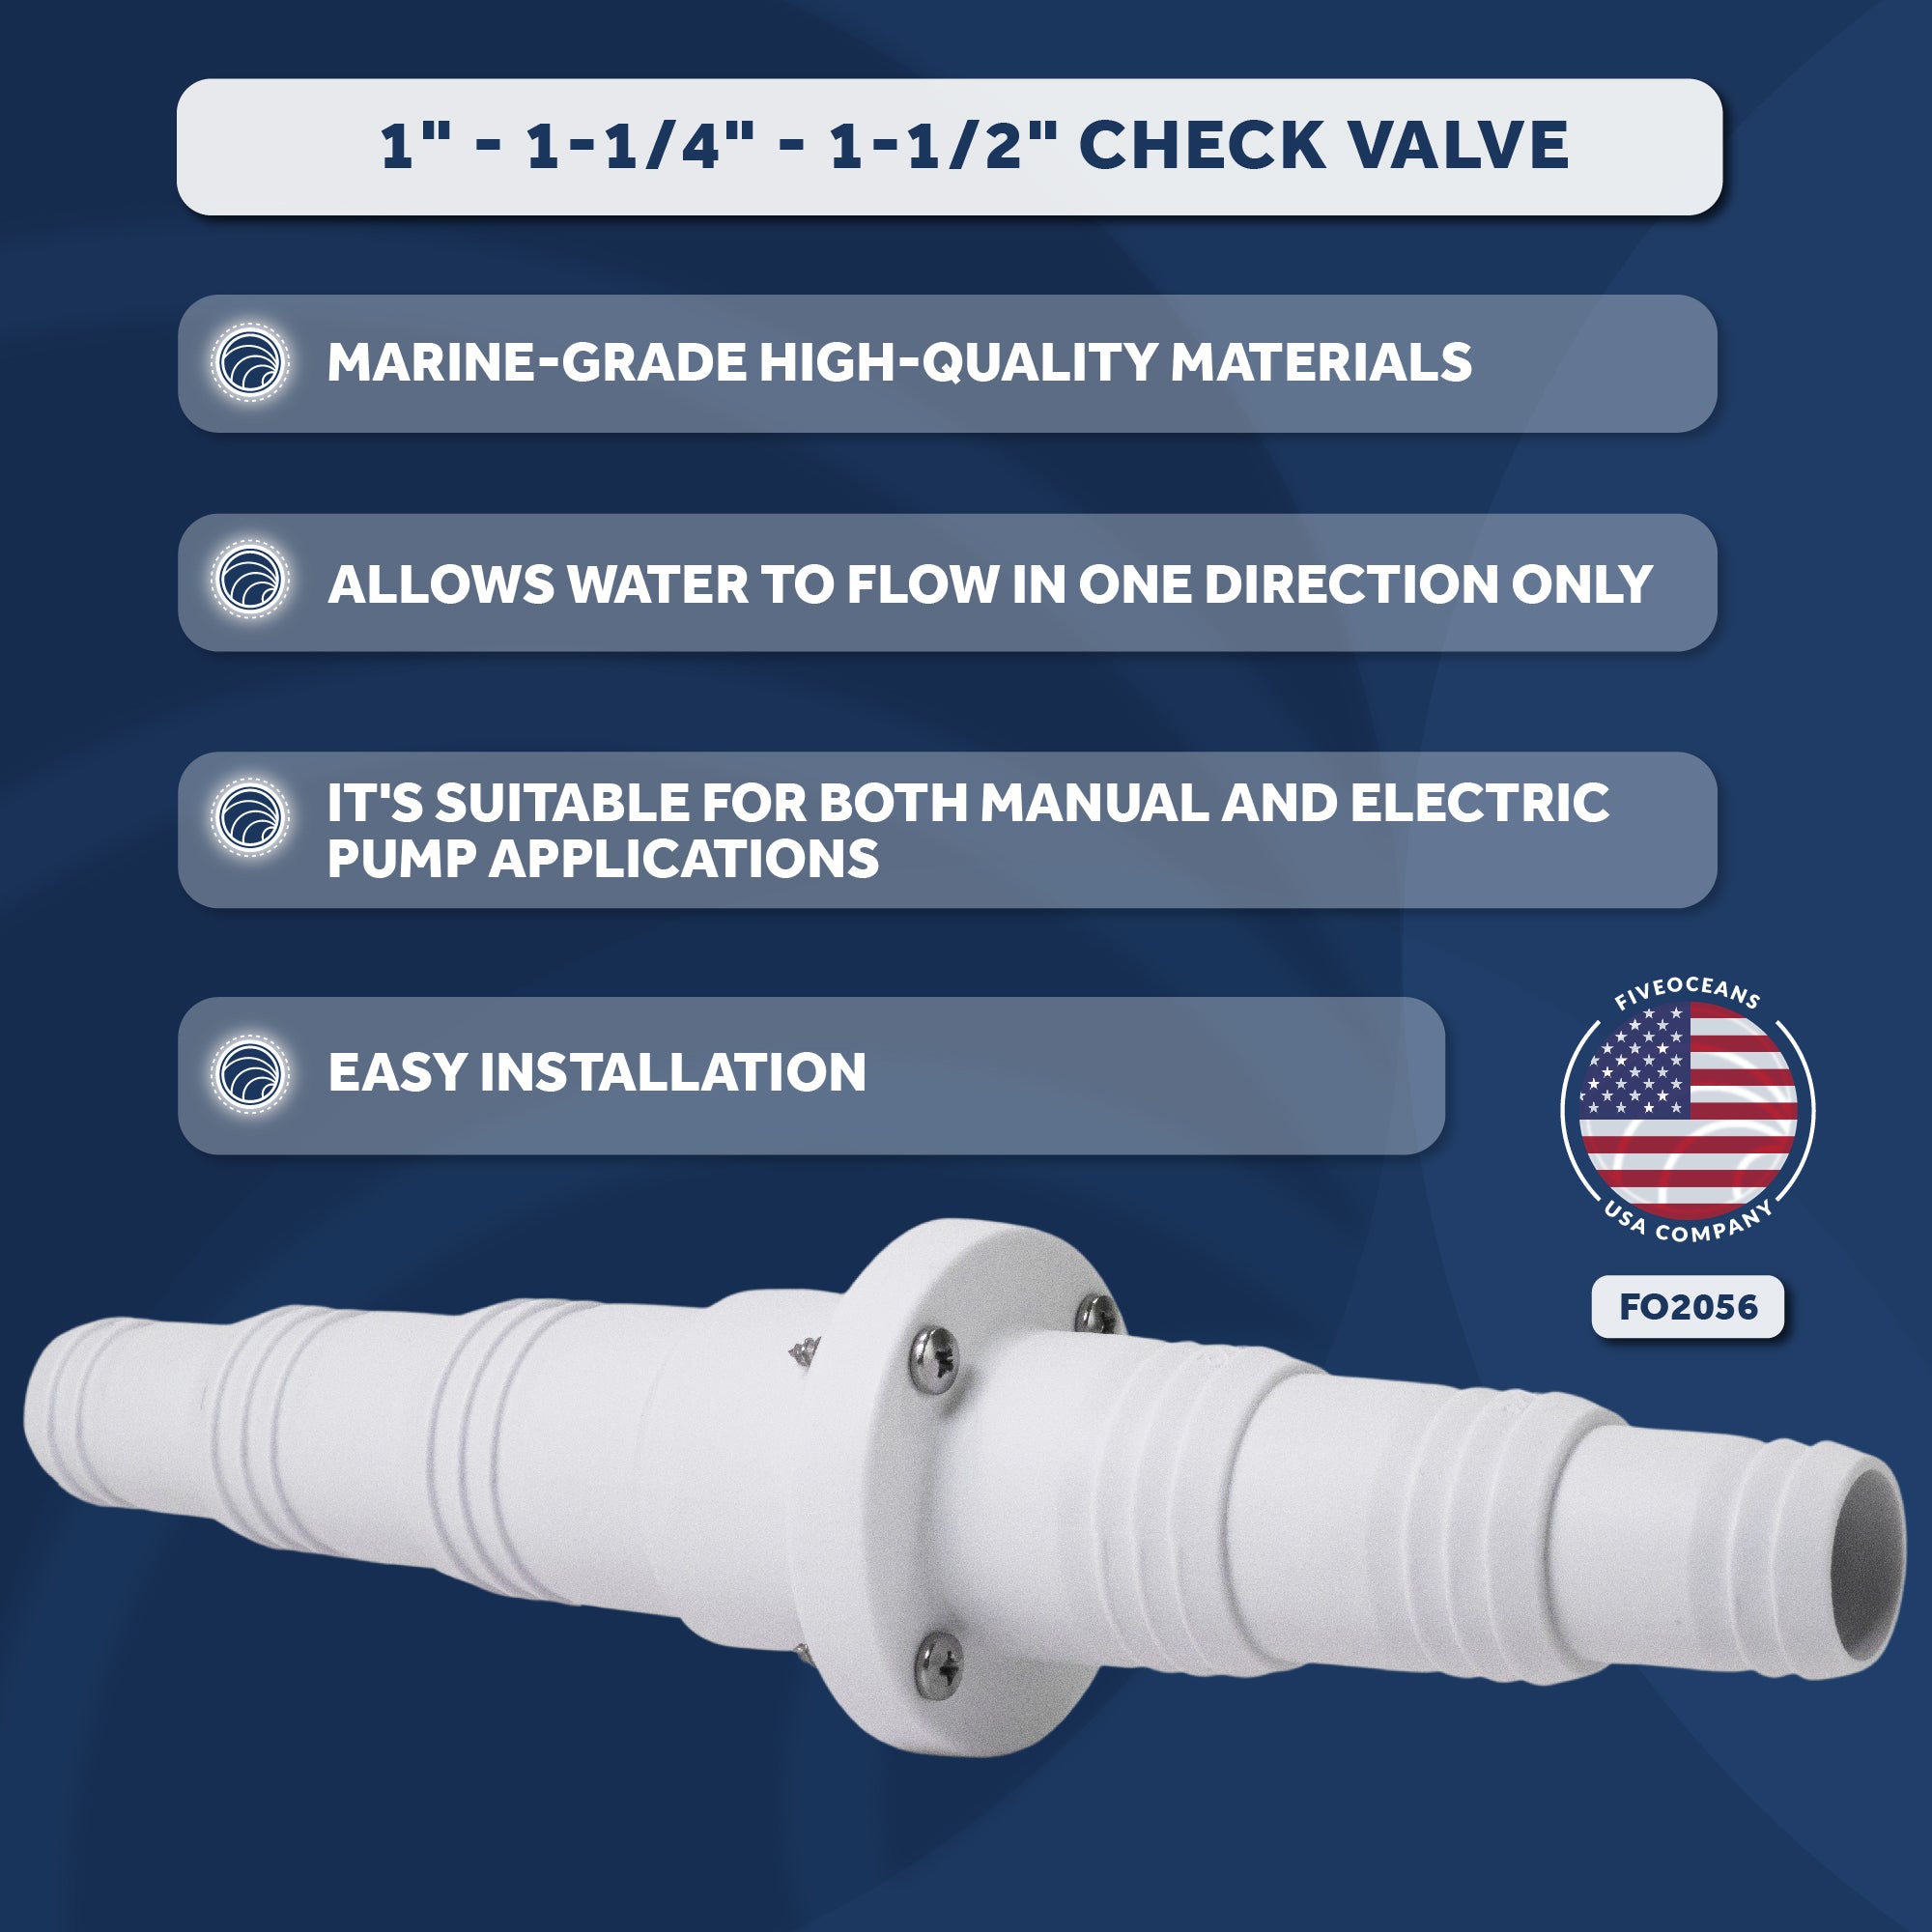 1" - 1-1/4" - 1-1/2" Check Valve, In-Line One-Way Stepped Connection - FO2056